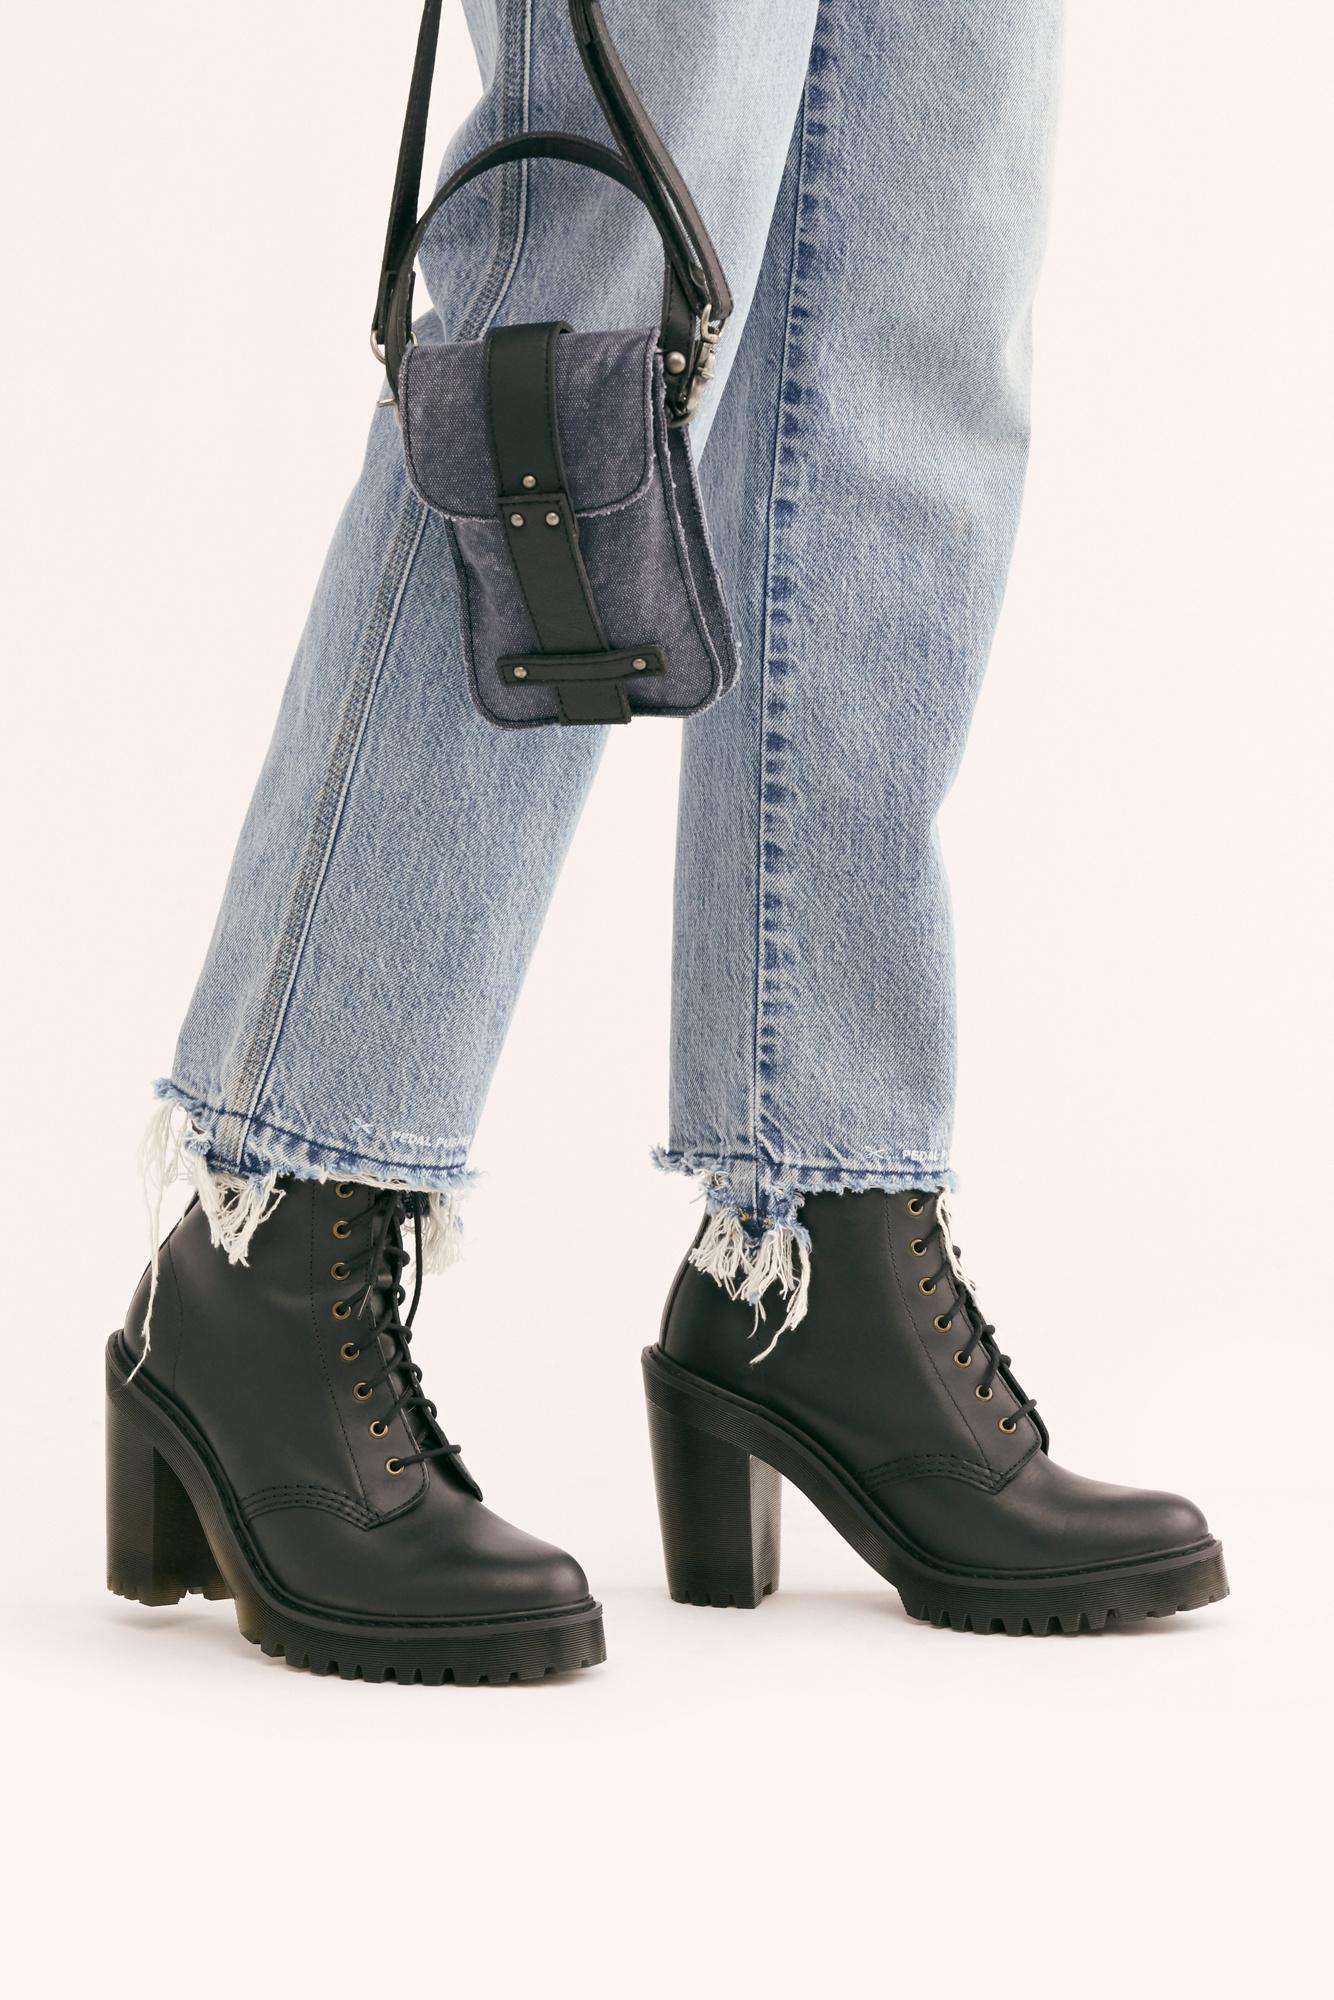 dr martens kendra black leather heeled ankle boots